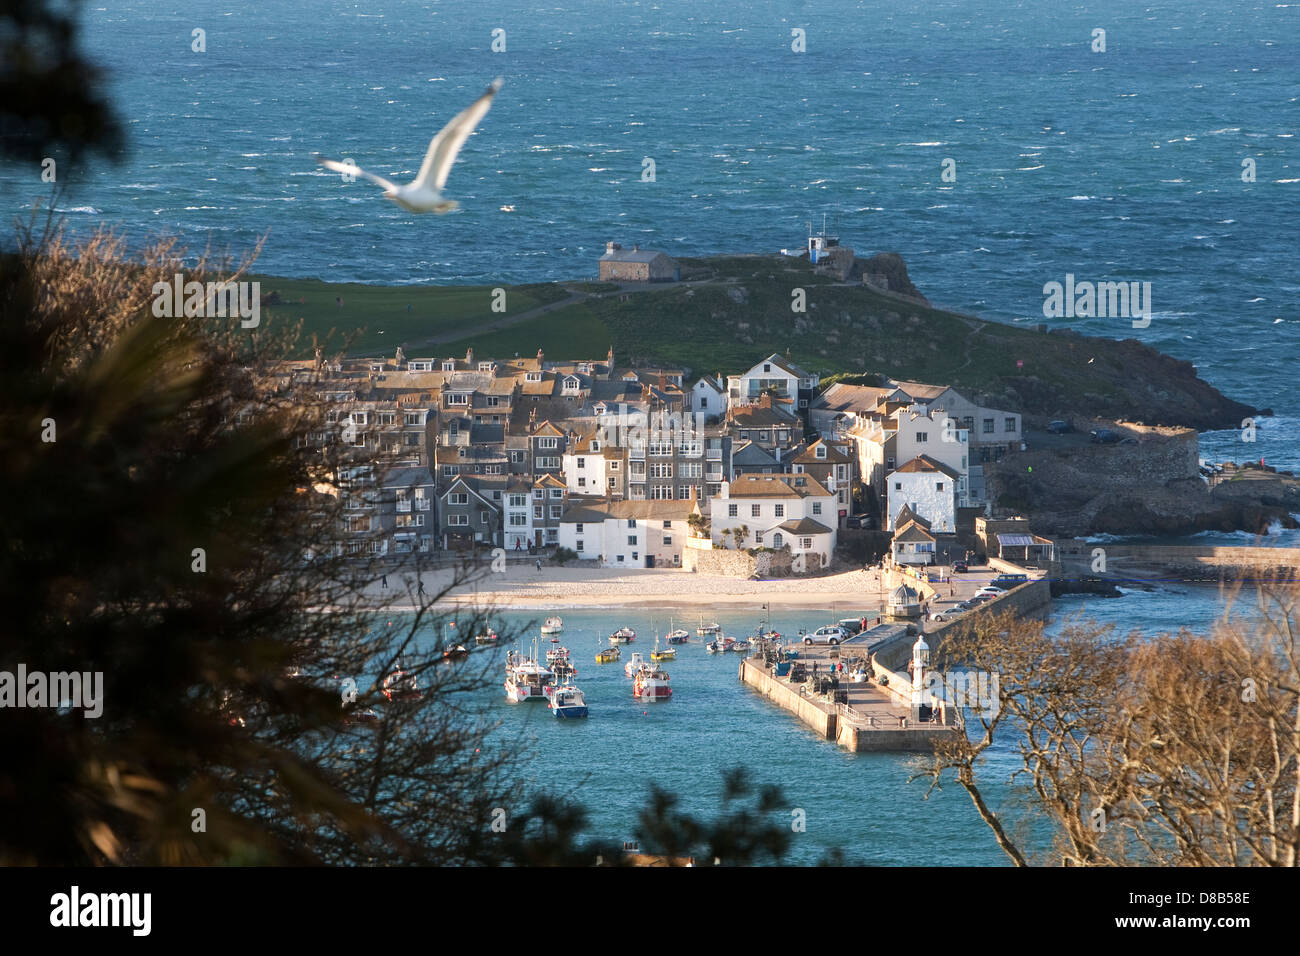 A seagull flies in the foreground of this view of St Ives harbour, Cornwall. Stock Photo